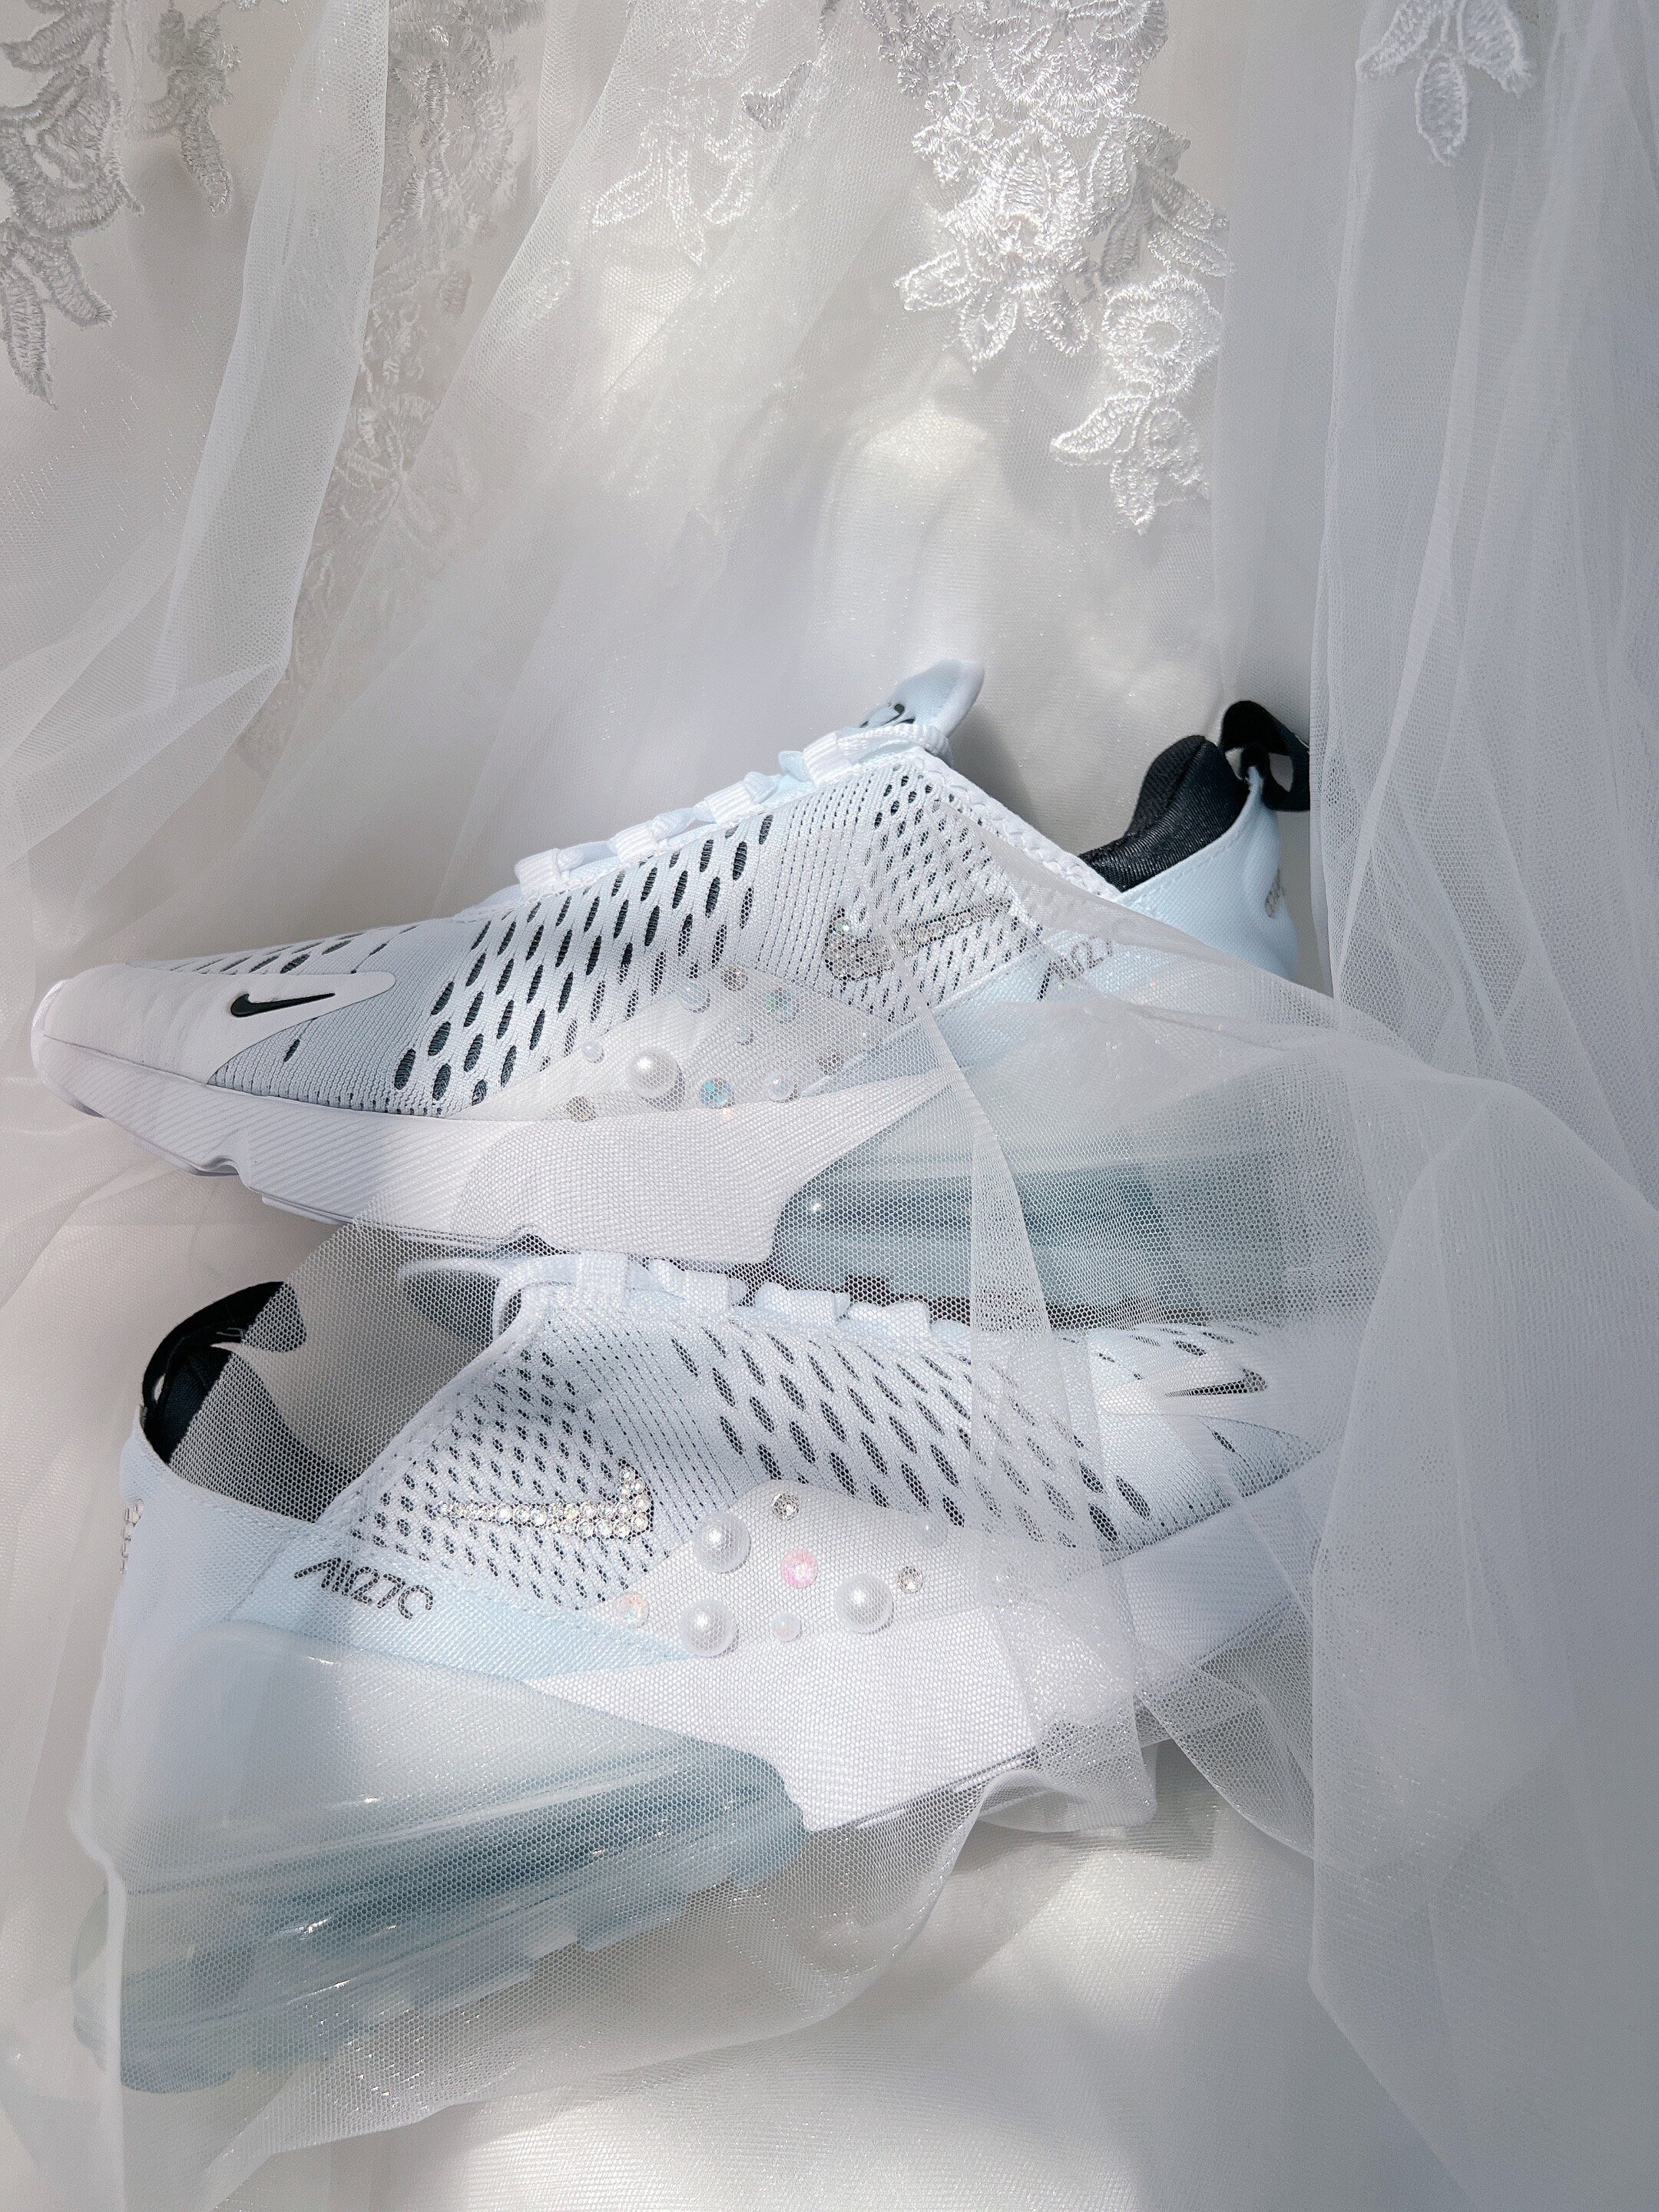 Customized Wedding Sneakers Personalized Bridal Nike Air Max 270 Pearls And Rhinestones